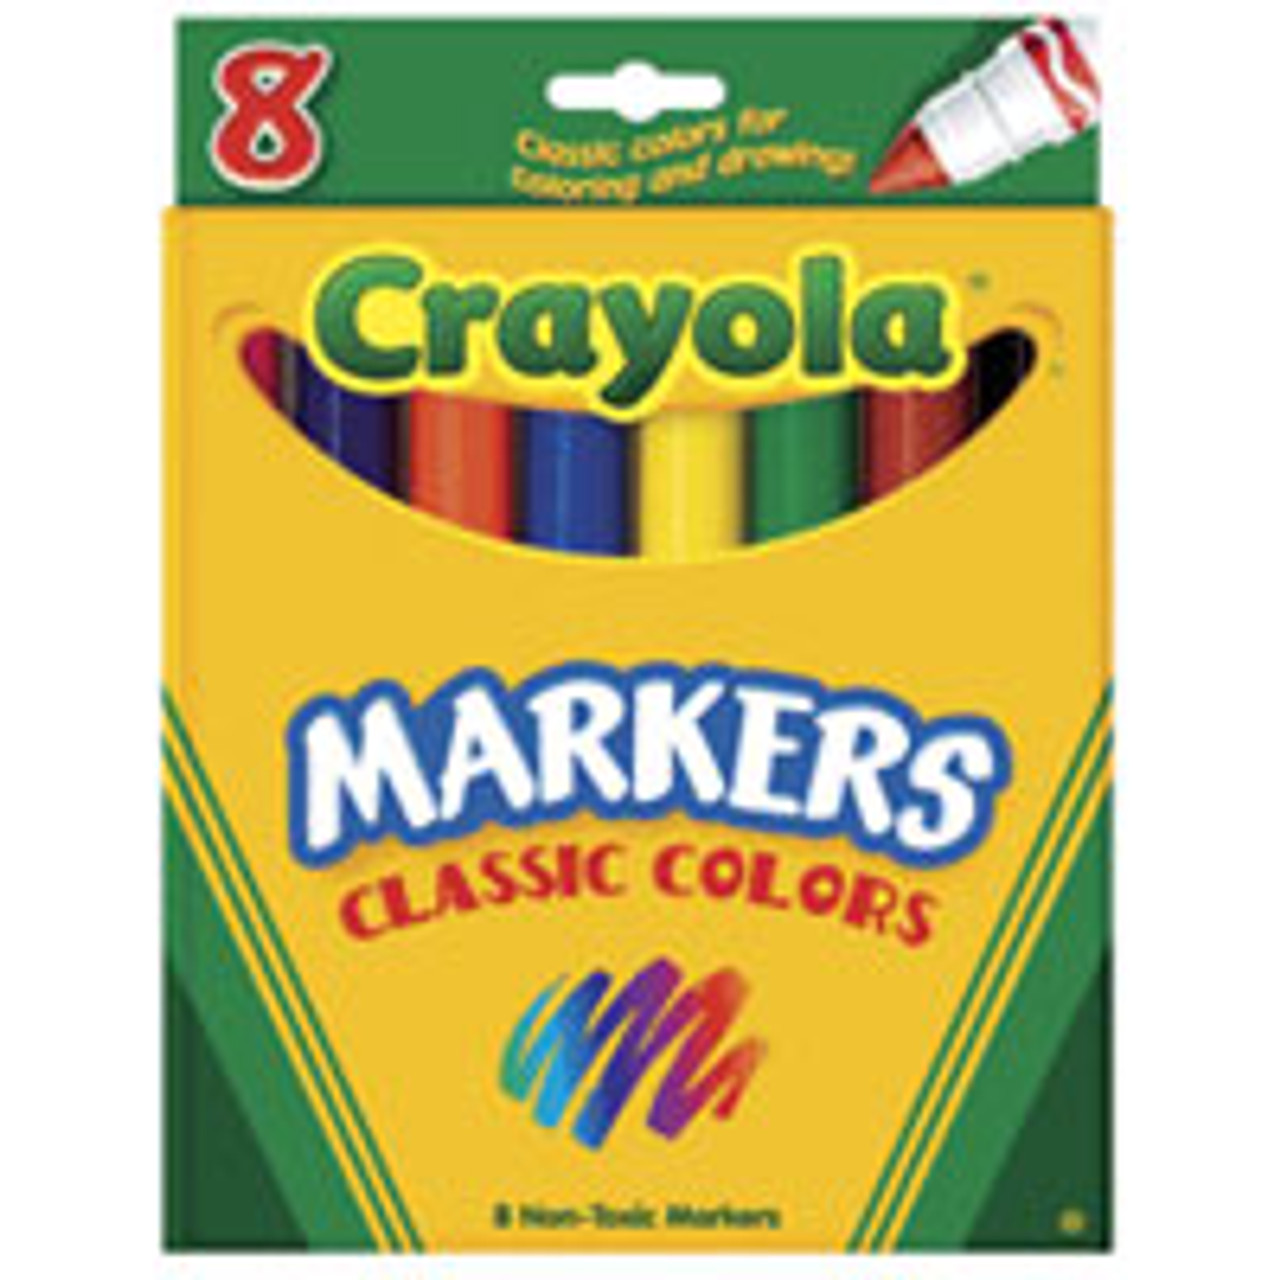 Crayola Long Lasting Non-toxic Markers Broad Line Classic